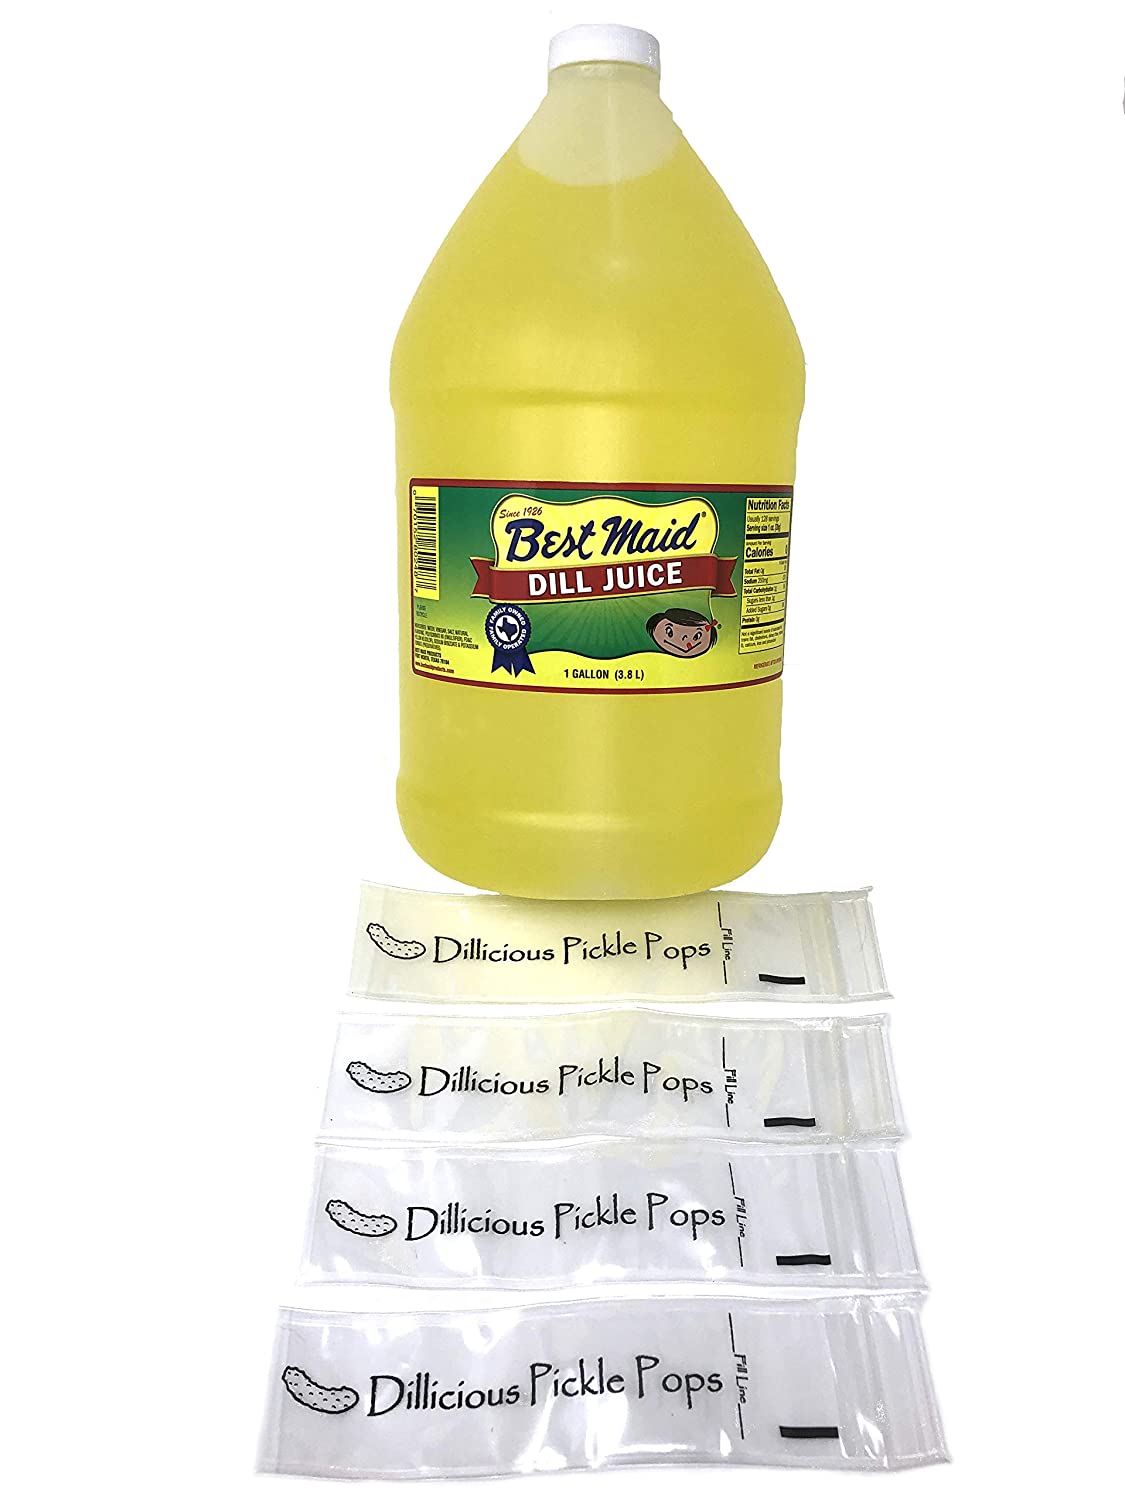 https://www.wideopencountry.com/wp-content/uploads/sites/4/2020/08/DILLicious-Pickle-Pops-Bundle-1-Gallon-Bottle-of-Best-Maid-Dill-Juice-Plus-43-DILLicious-Pickle-Pop-Bags-Make-Your-Own-Pickle-Popsicles-At-Home-.jpg?resize=1125%2C1500